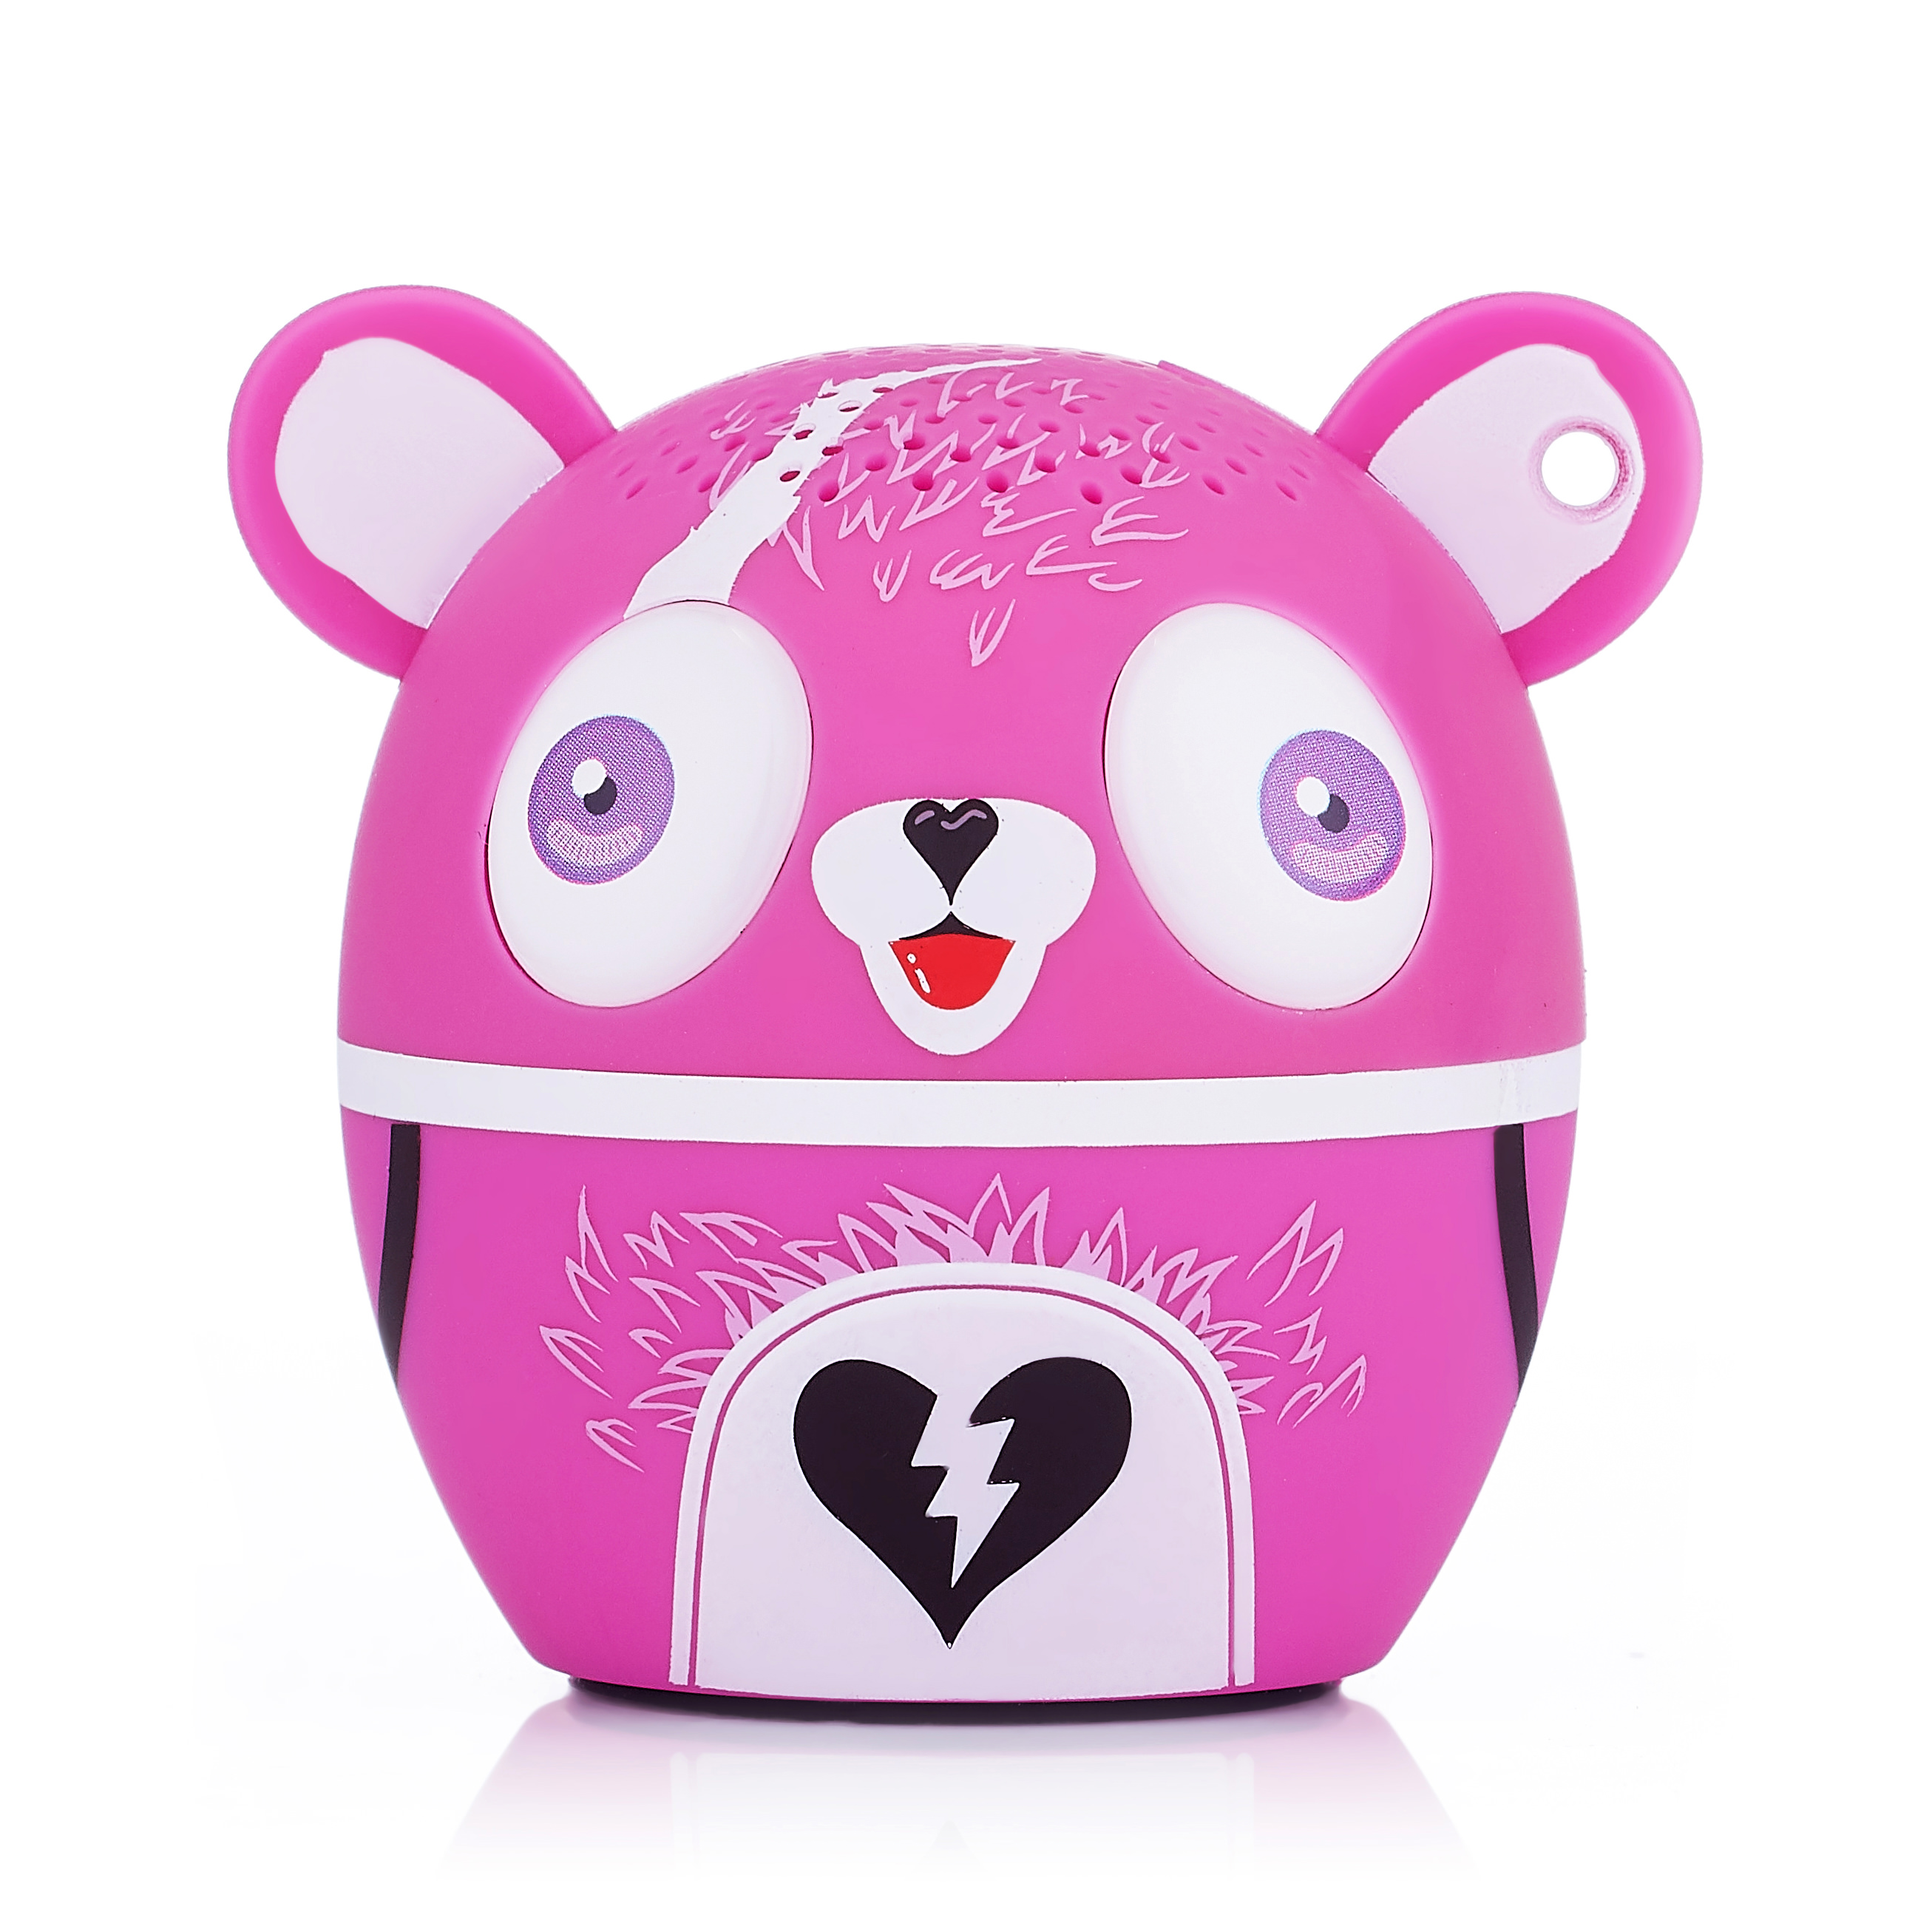 Fortnite Cuddle Team Leader - Collectible Bluetooth Speaker - image 1 of 2